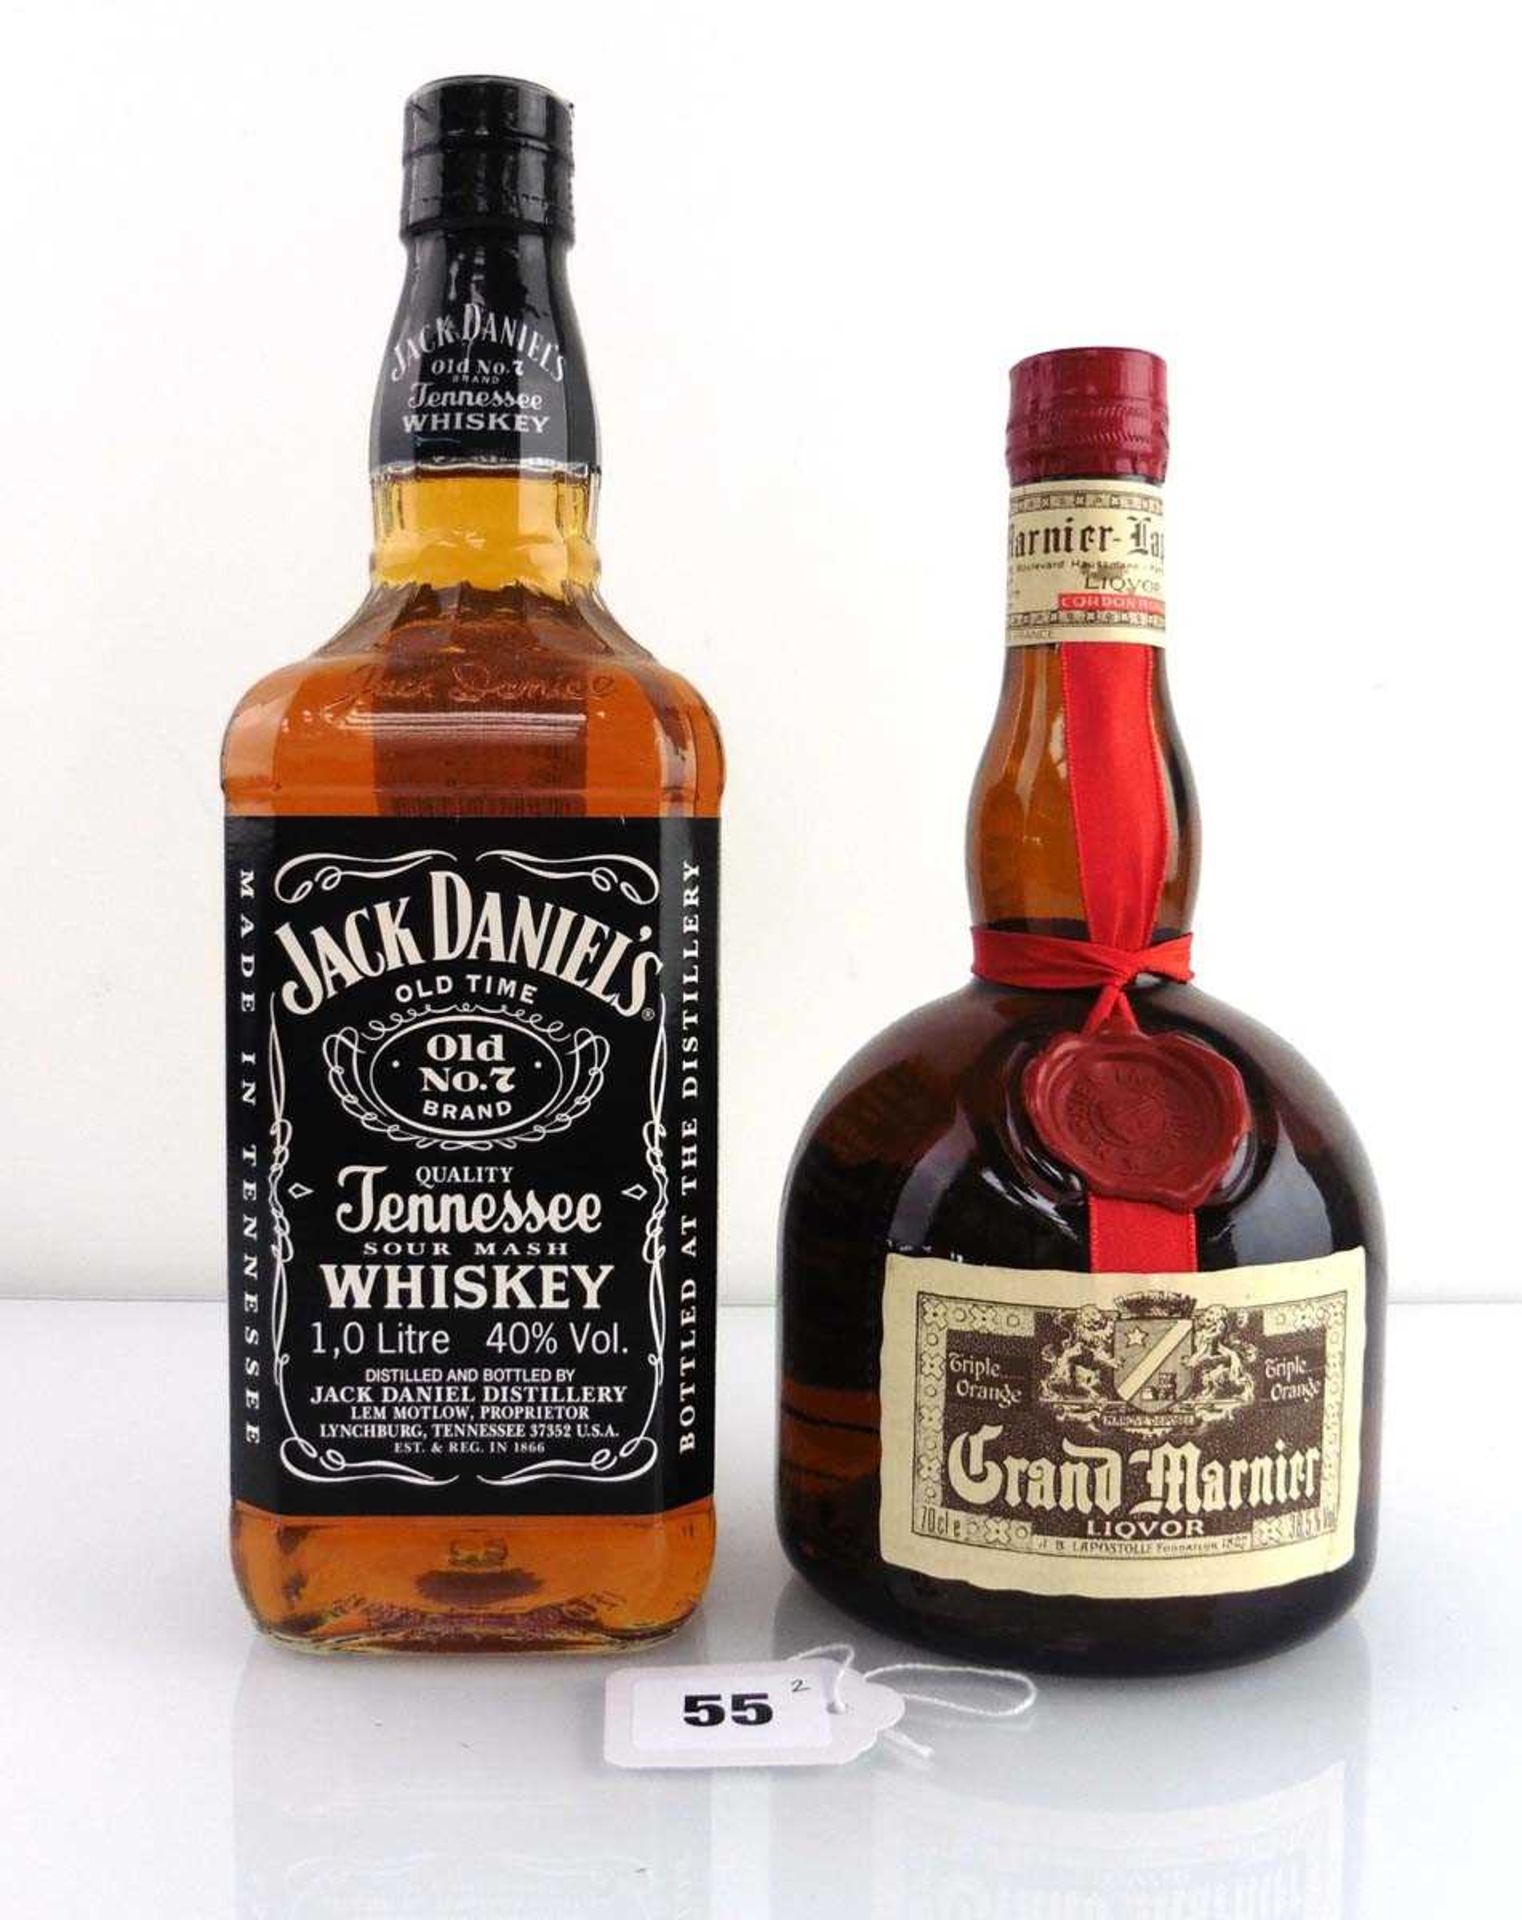 2 bottles, 1x Jack Daniel's Old Time No.7 Tennessee Sour Mash Whiskey 1 litre 40% & 1x Grand Marnier